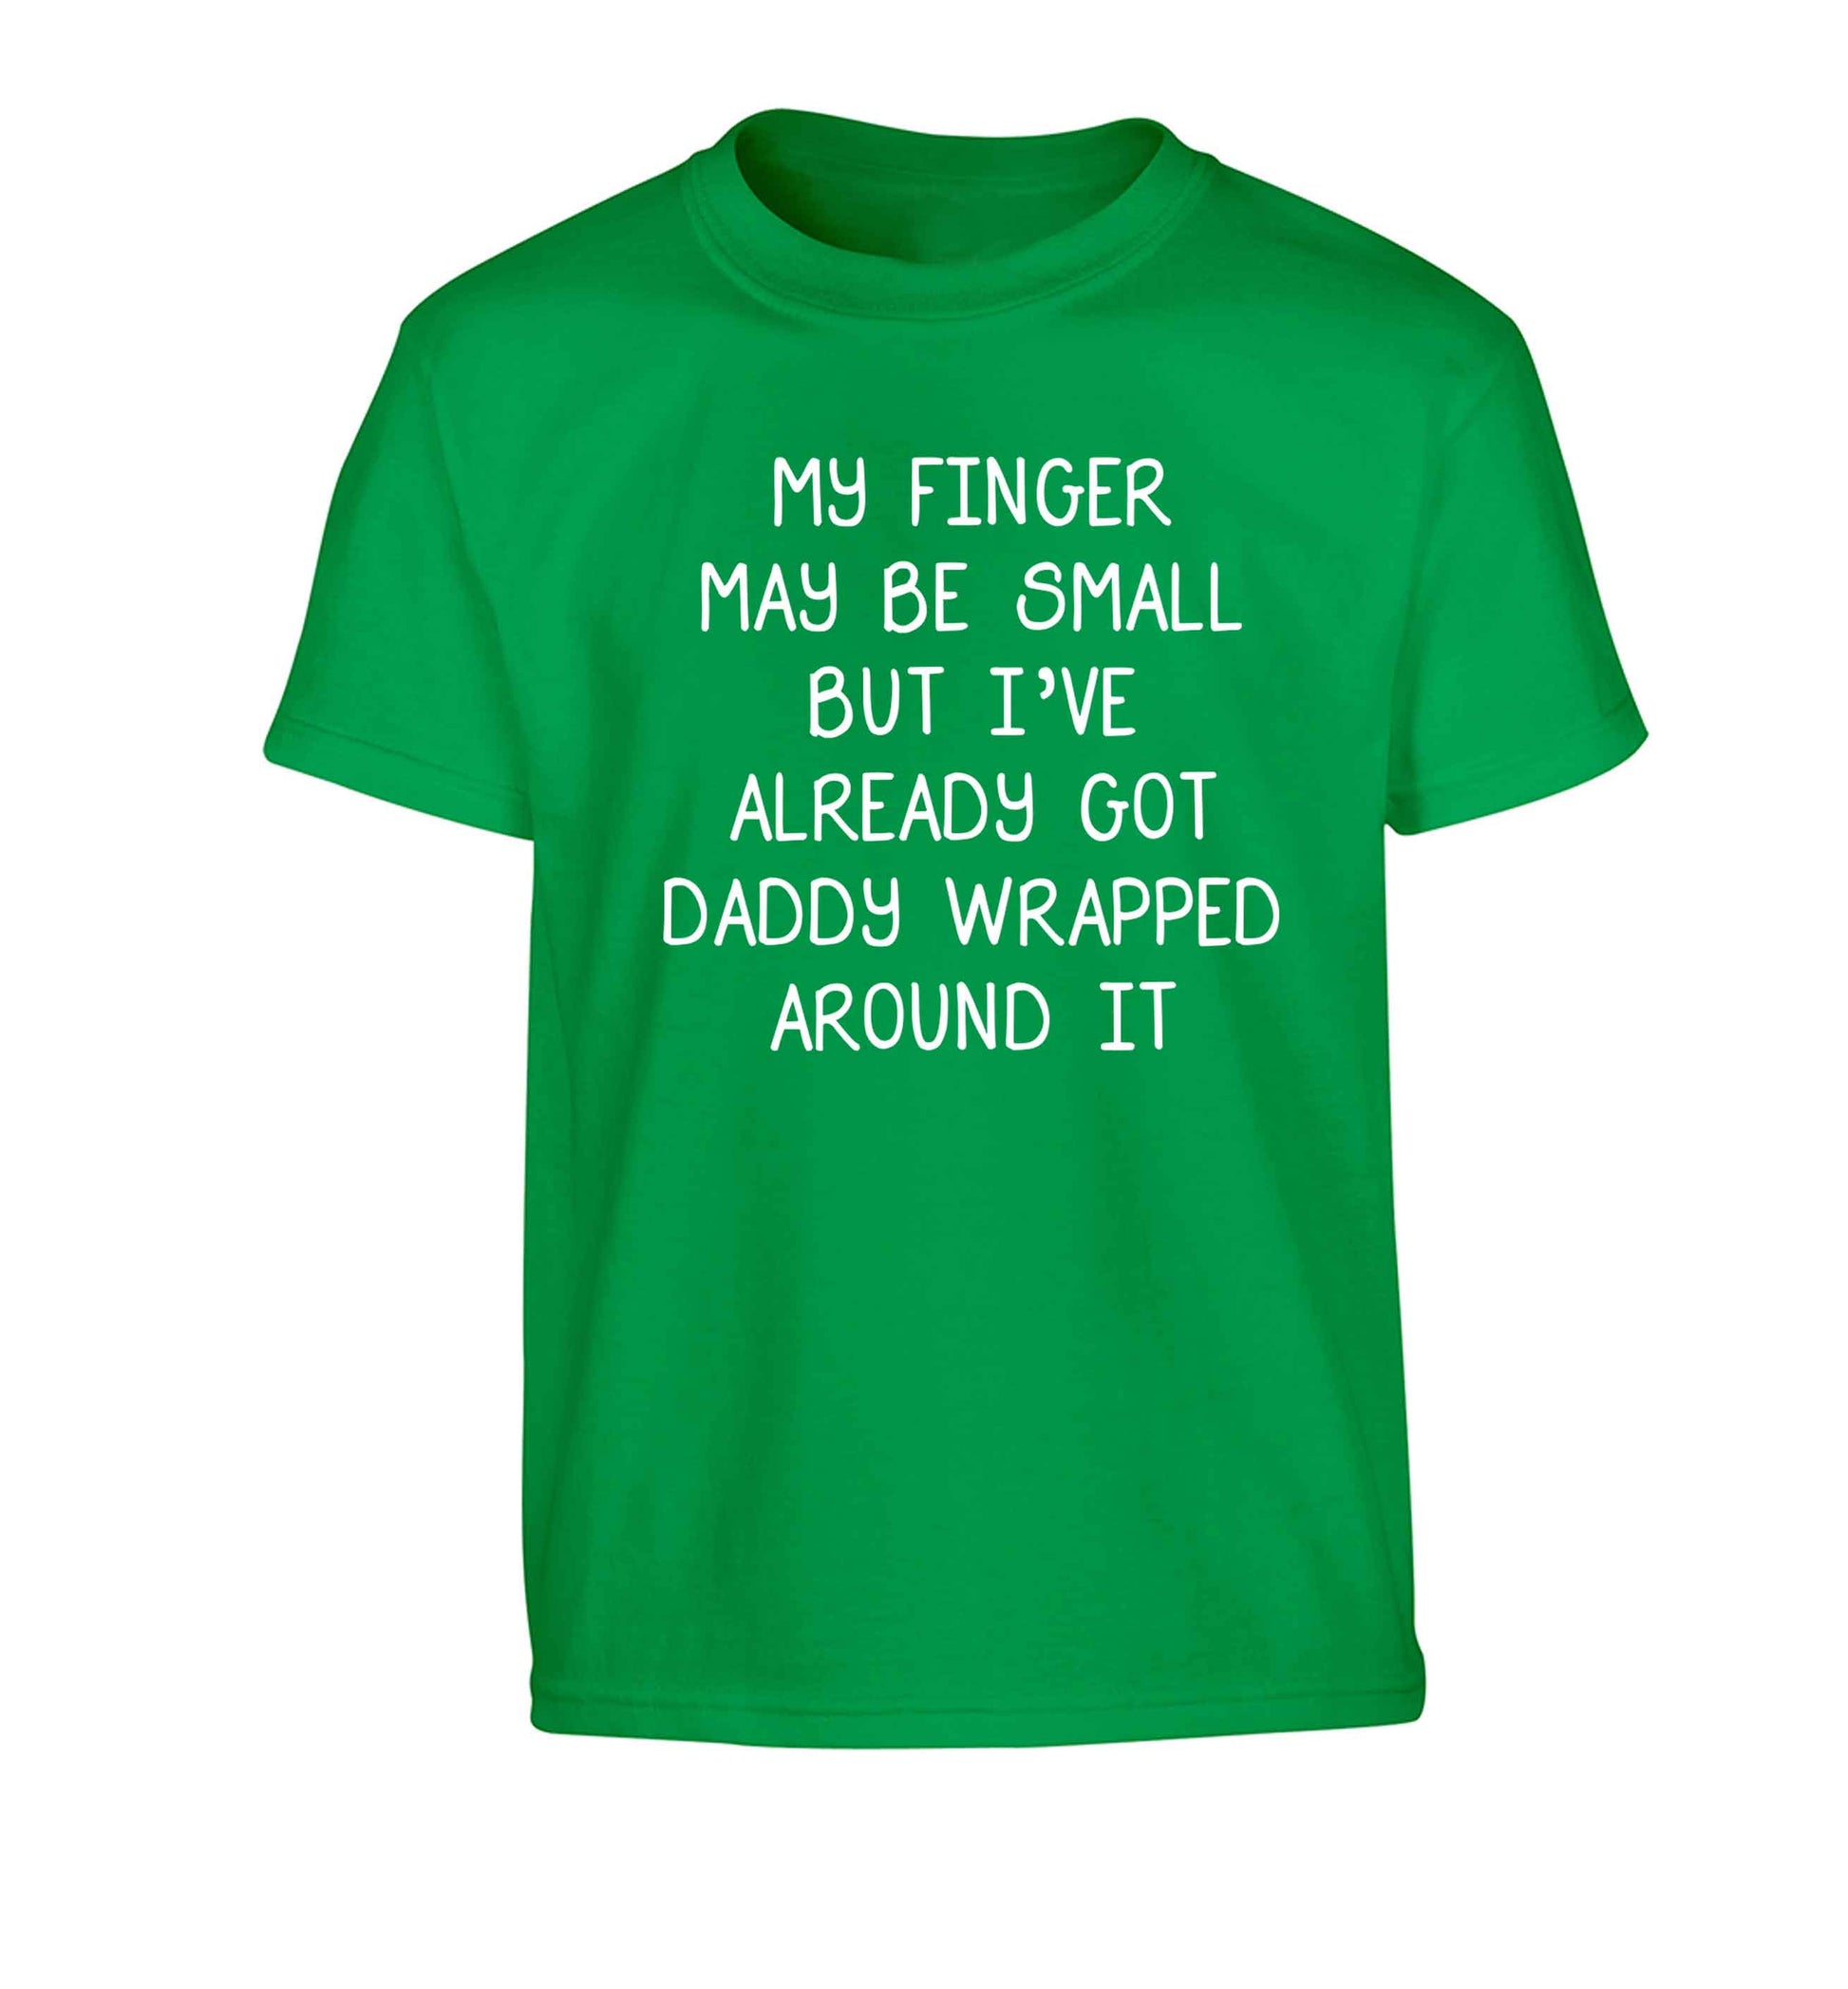 My finger may be small but I've already got daddy wrapped around it Children's green Tshirt 12-13 Years